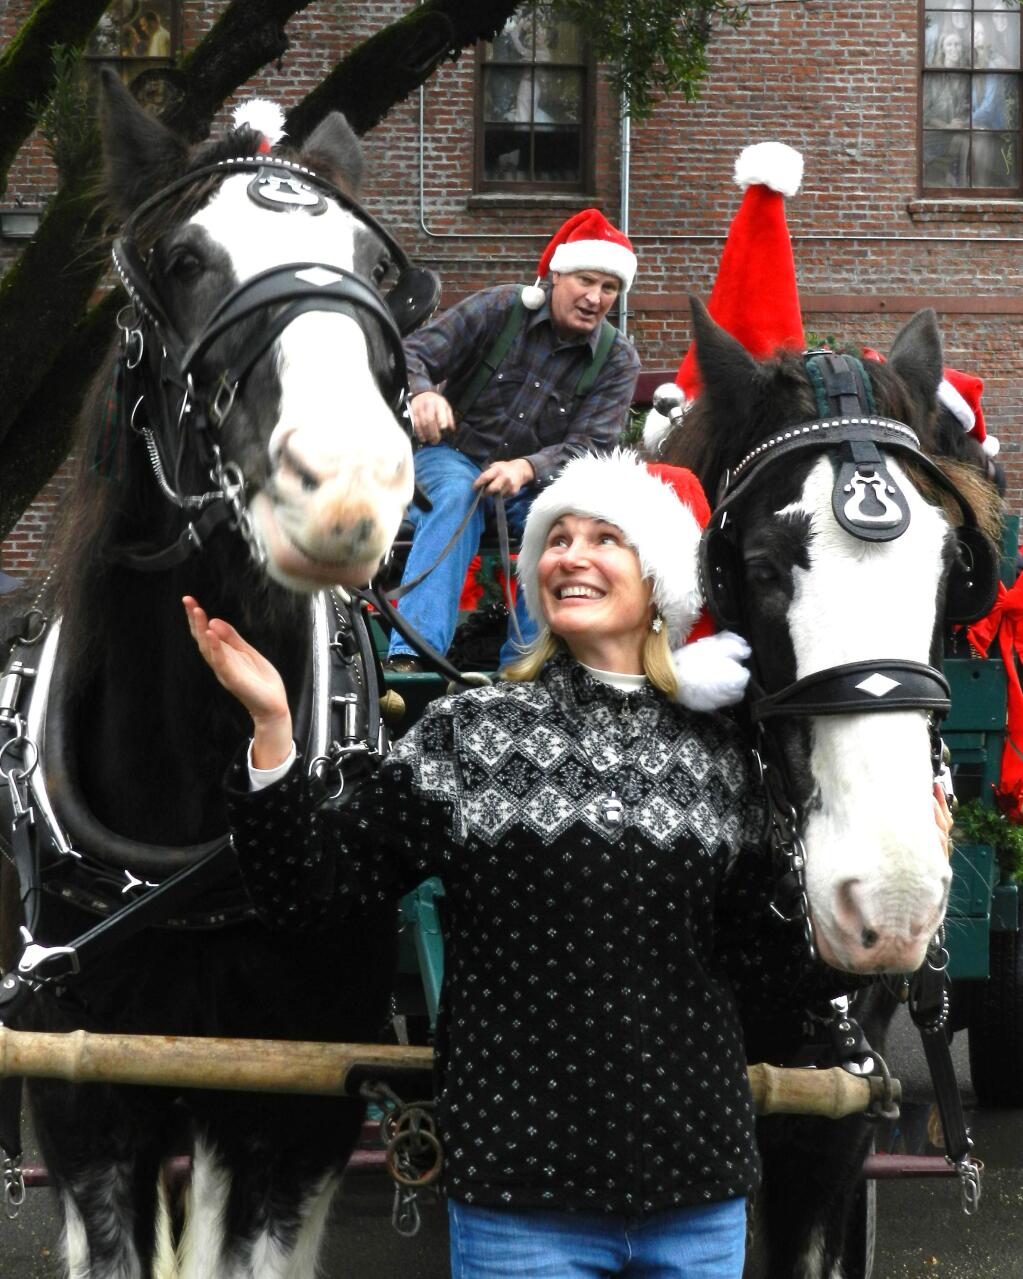 Yvonne Soto-Pomeroy/Index-TribuneCaroling in Glen EllenSaturday, numerous children and adults took part in caroling through Glen Ellen. Here, Karen Buchanan, Neil Shepard's assistant, pets the horses during one of the stopovers to pick up more carolers. In addition to getting to ride in Shepard's wagon, the boys and girls and their parents sang carols, accompanied as usual by Bob Gossett on his guitar. And s a special treat, Santa rode along and passed out candy canes along with plenty of Christmas good will.